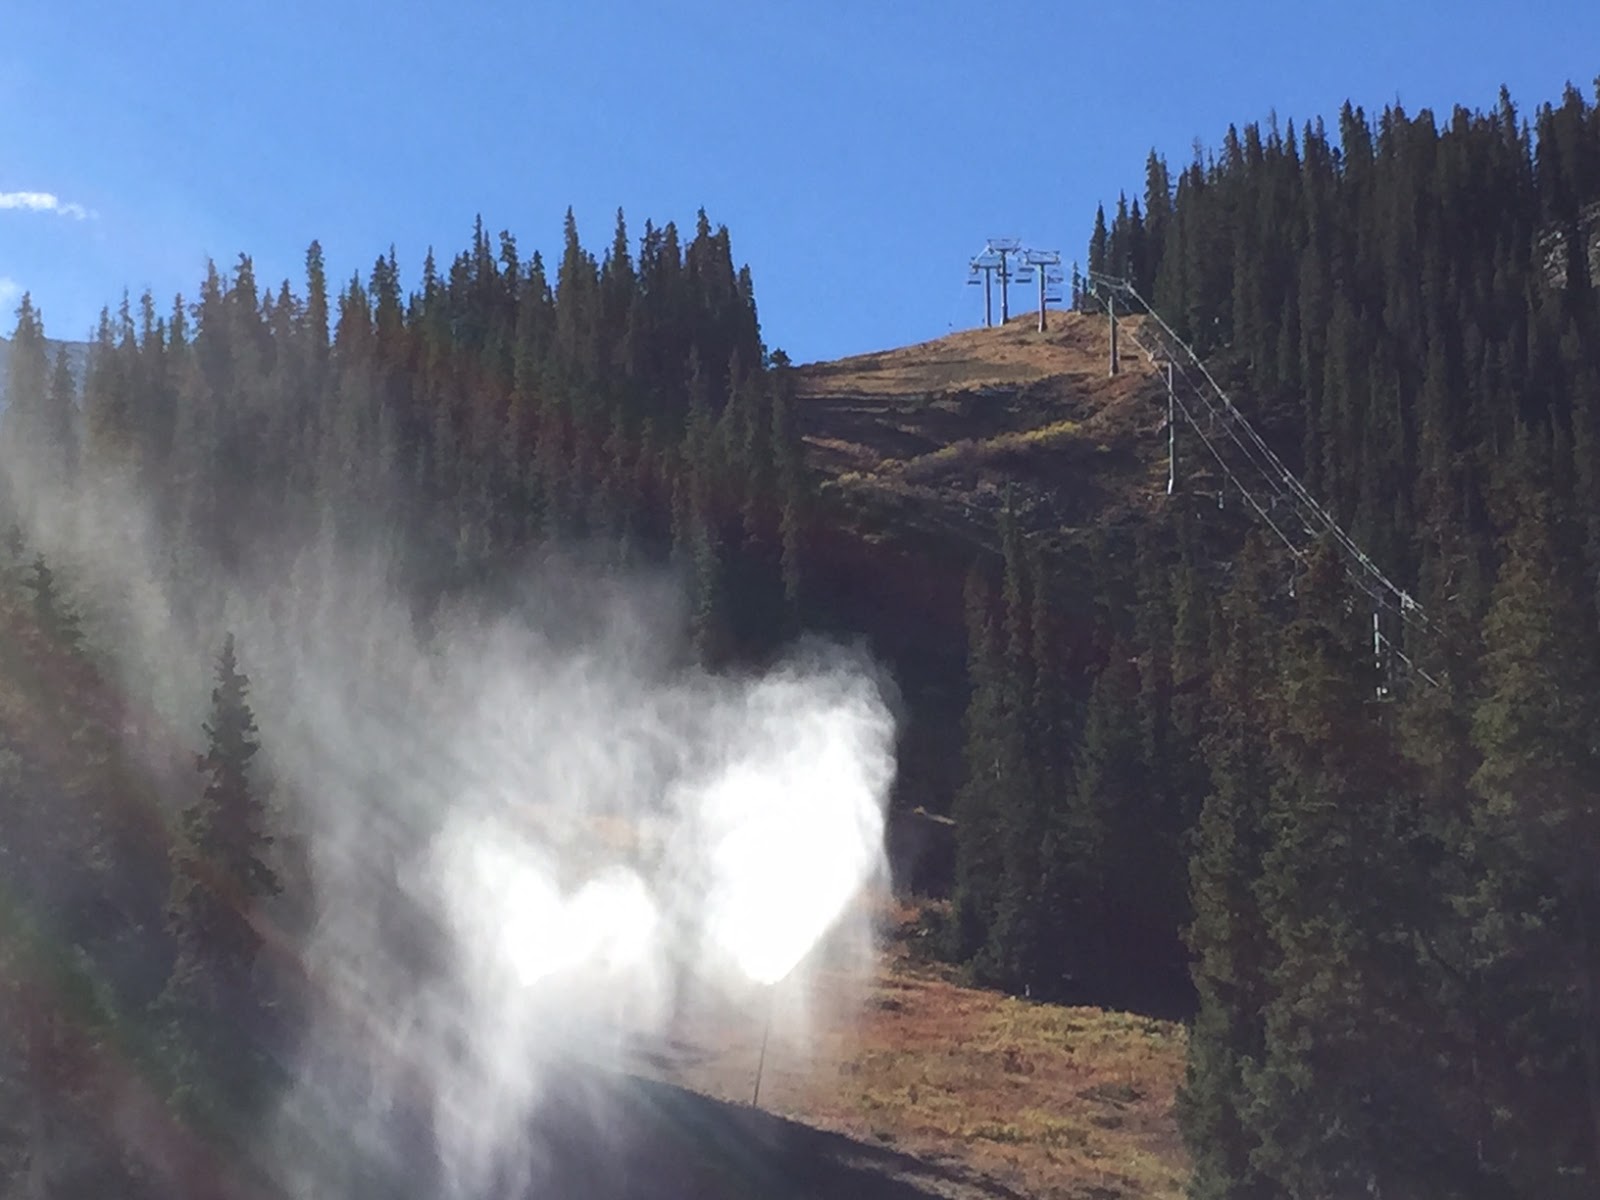 Arapahoe Basin, CO fires up and tests it's snow guns two days ago. photo: arapahoe basin